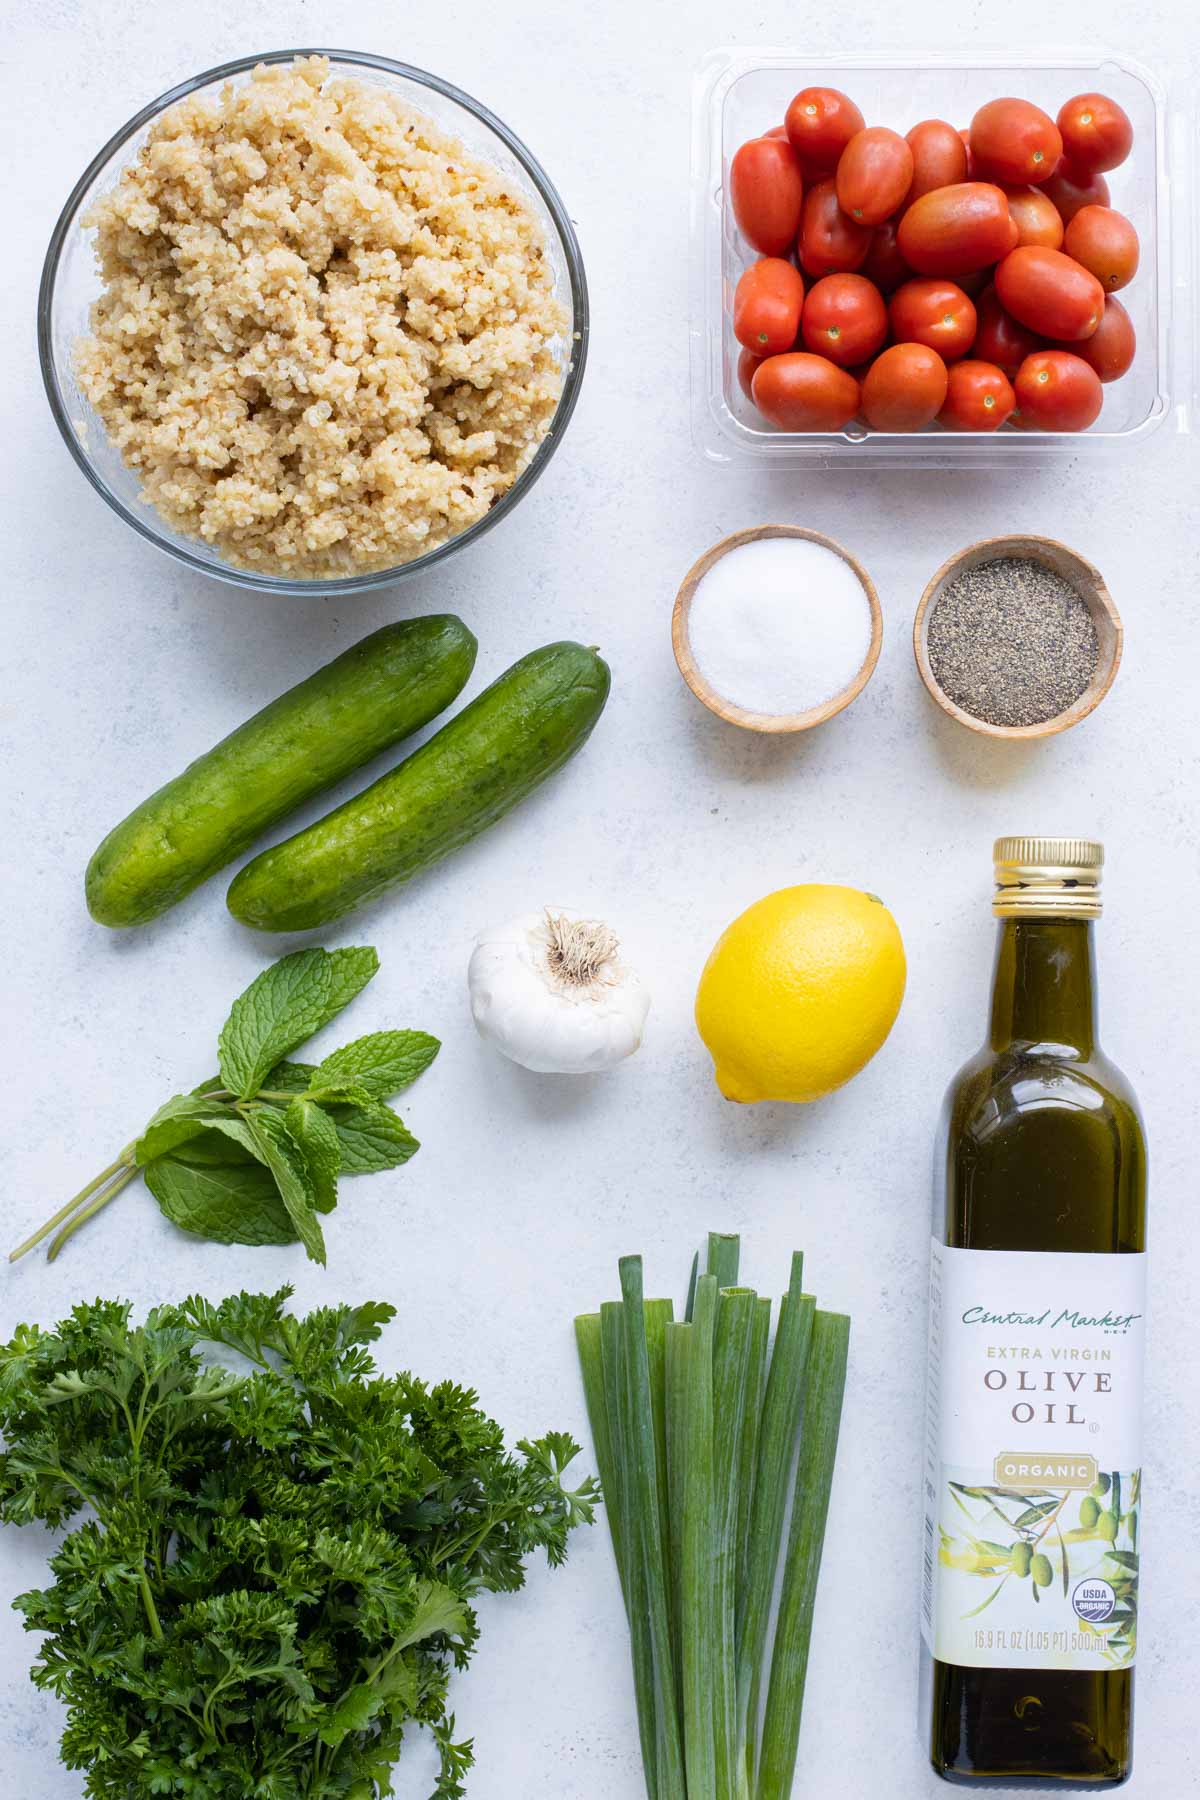 Quinoa, tomatoes, mint, cucumbers, green onions, parsley, lemon, garlic, and oil are the ingredients for this simple salad.